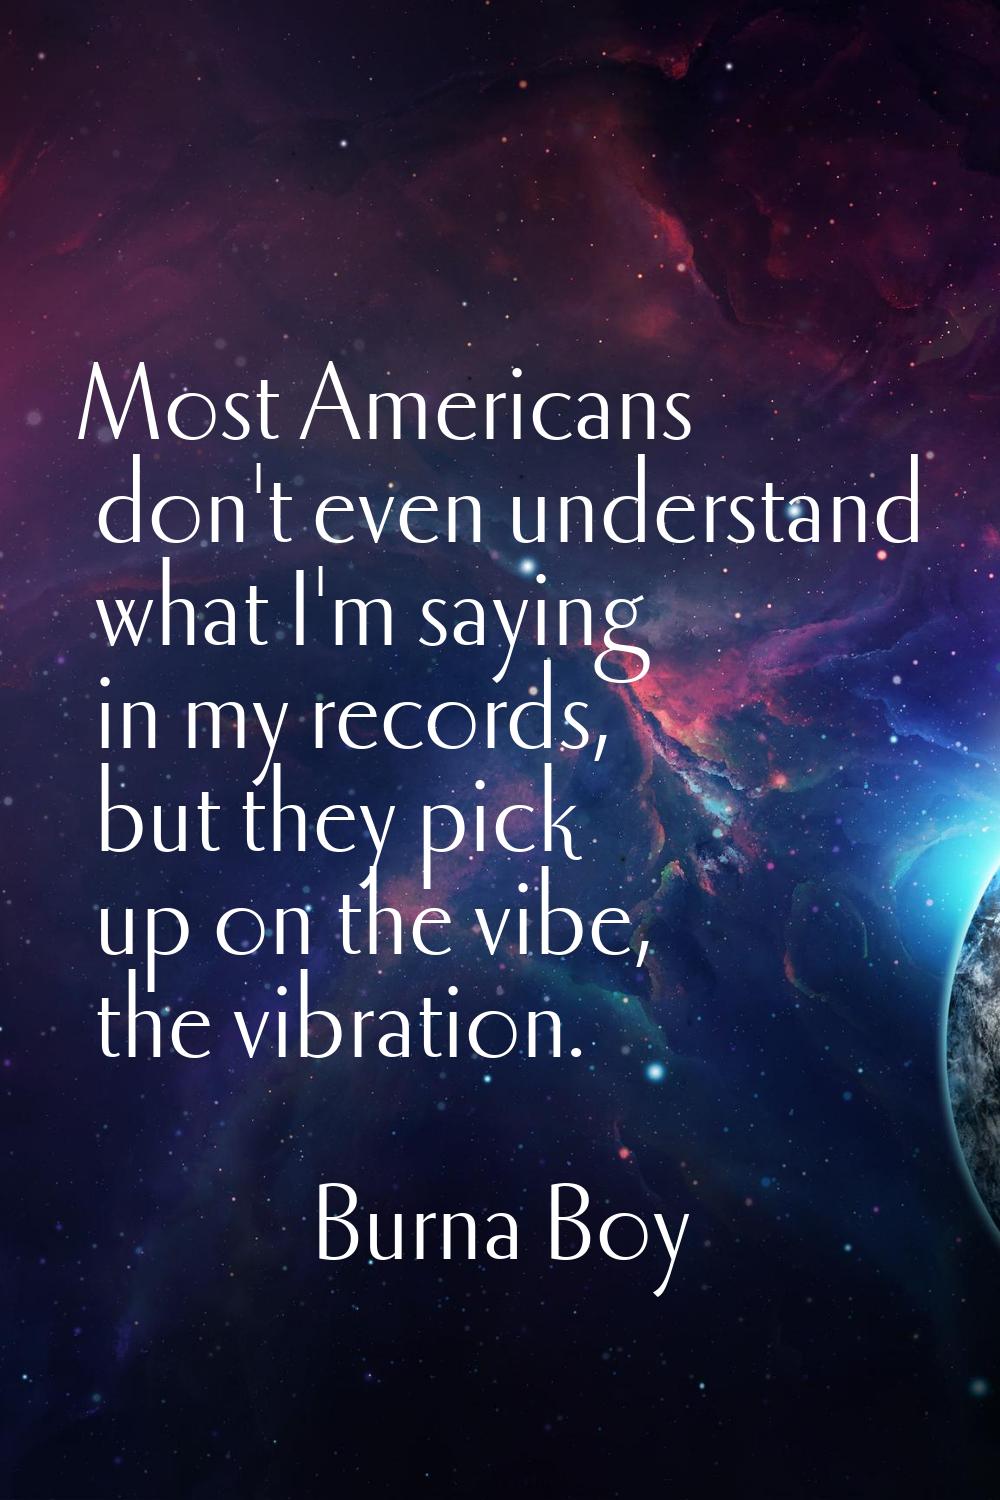 Most Americans don't even understand what I'm saying in my records, but they pick up on the vibe, t